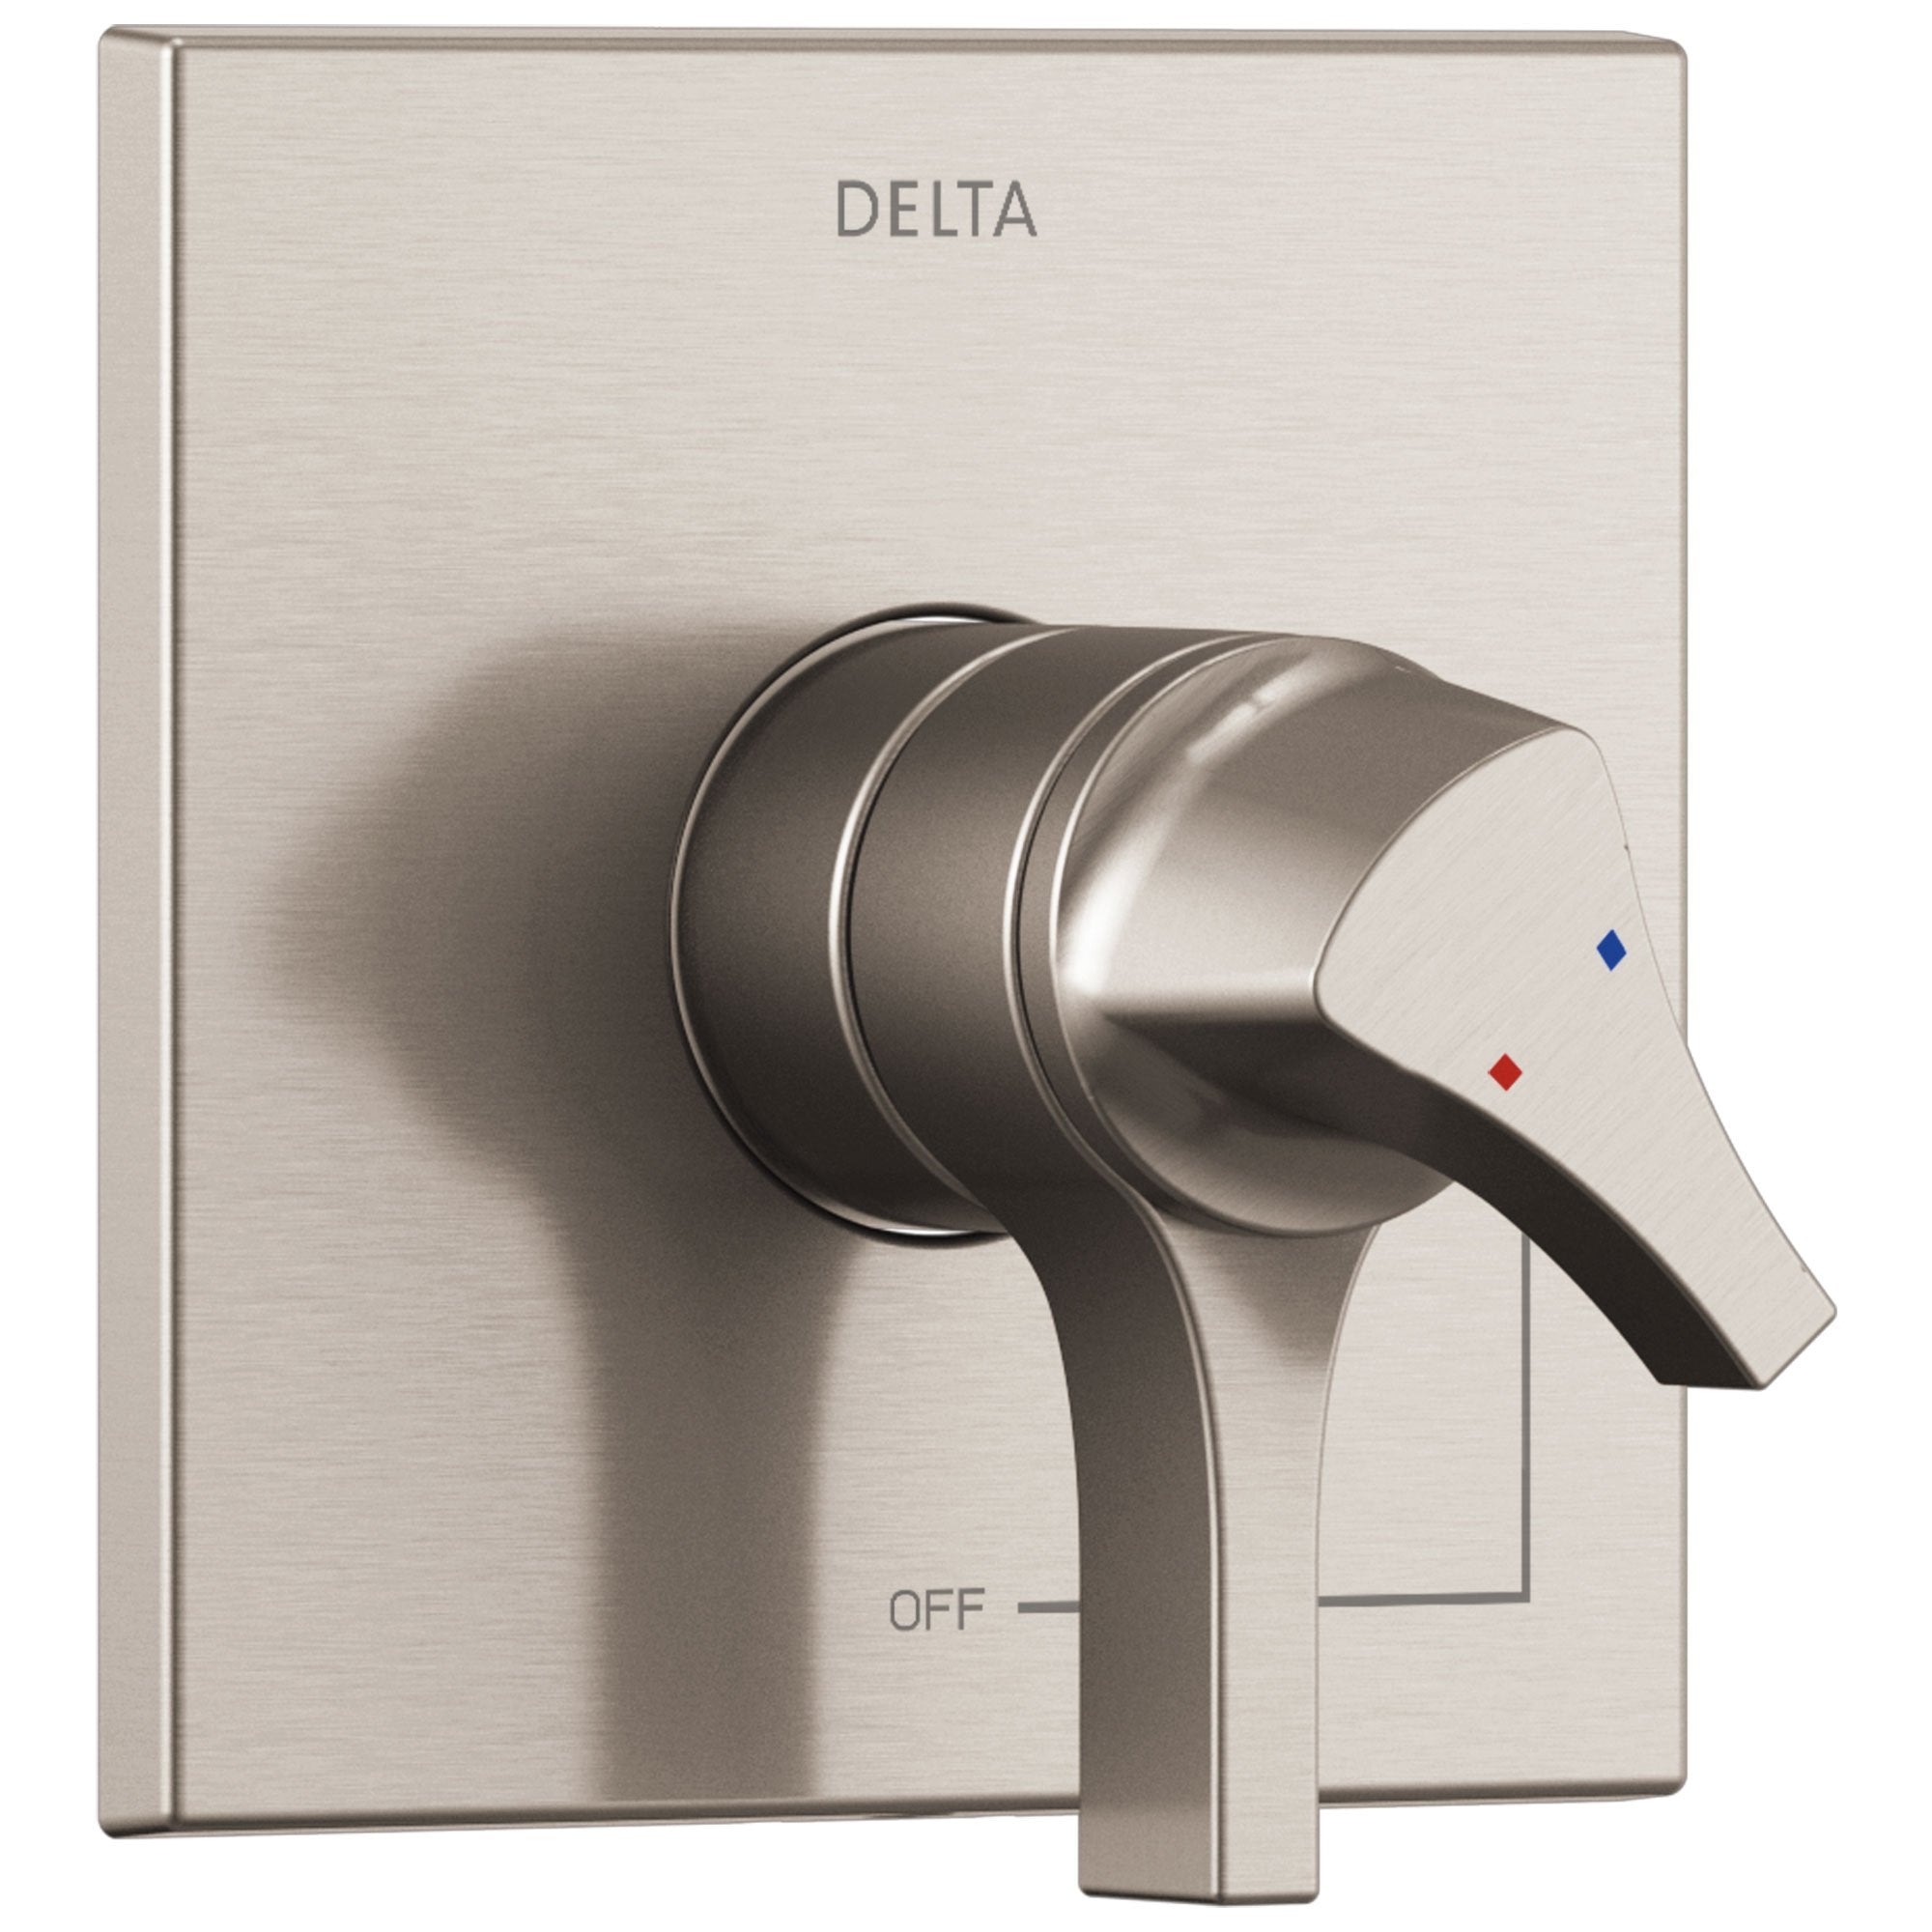 Delta Zura Stainless Steel Finish Monitor 17 Dual Temperature and Water Pressure Shower Faucet Control Handle Includes Trim Kit and Valve with Stops D1973V